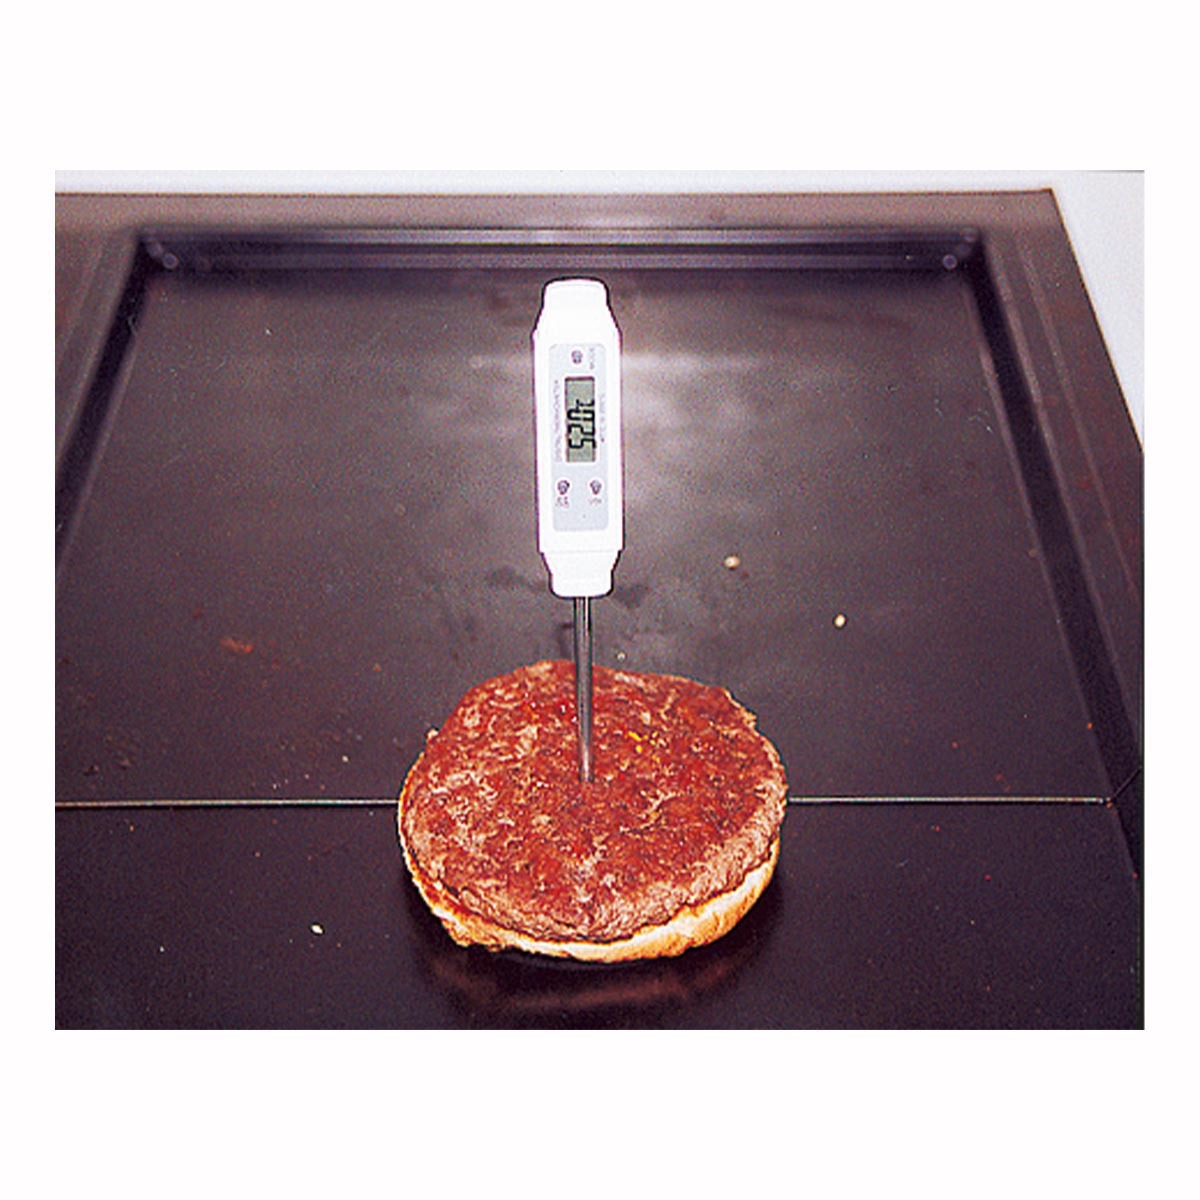 Food Check Thermometer with Penetration Probe - PSE - Priggen